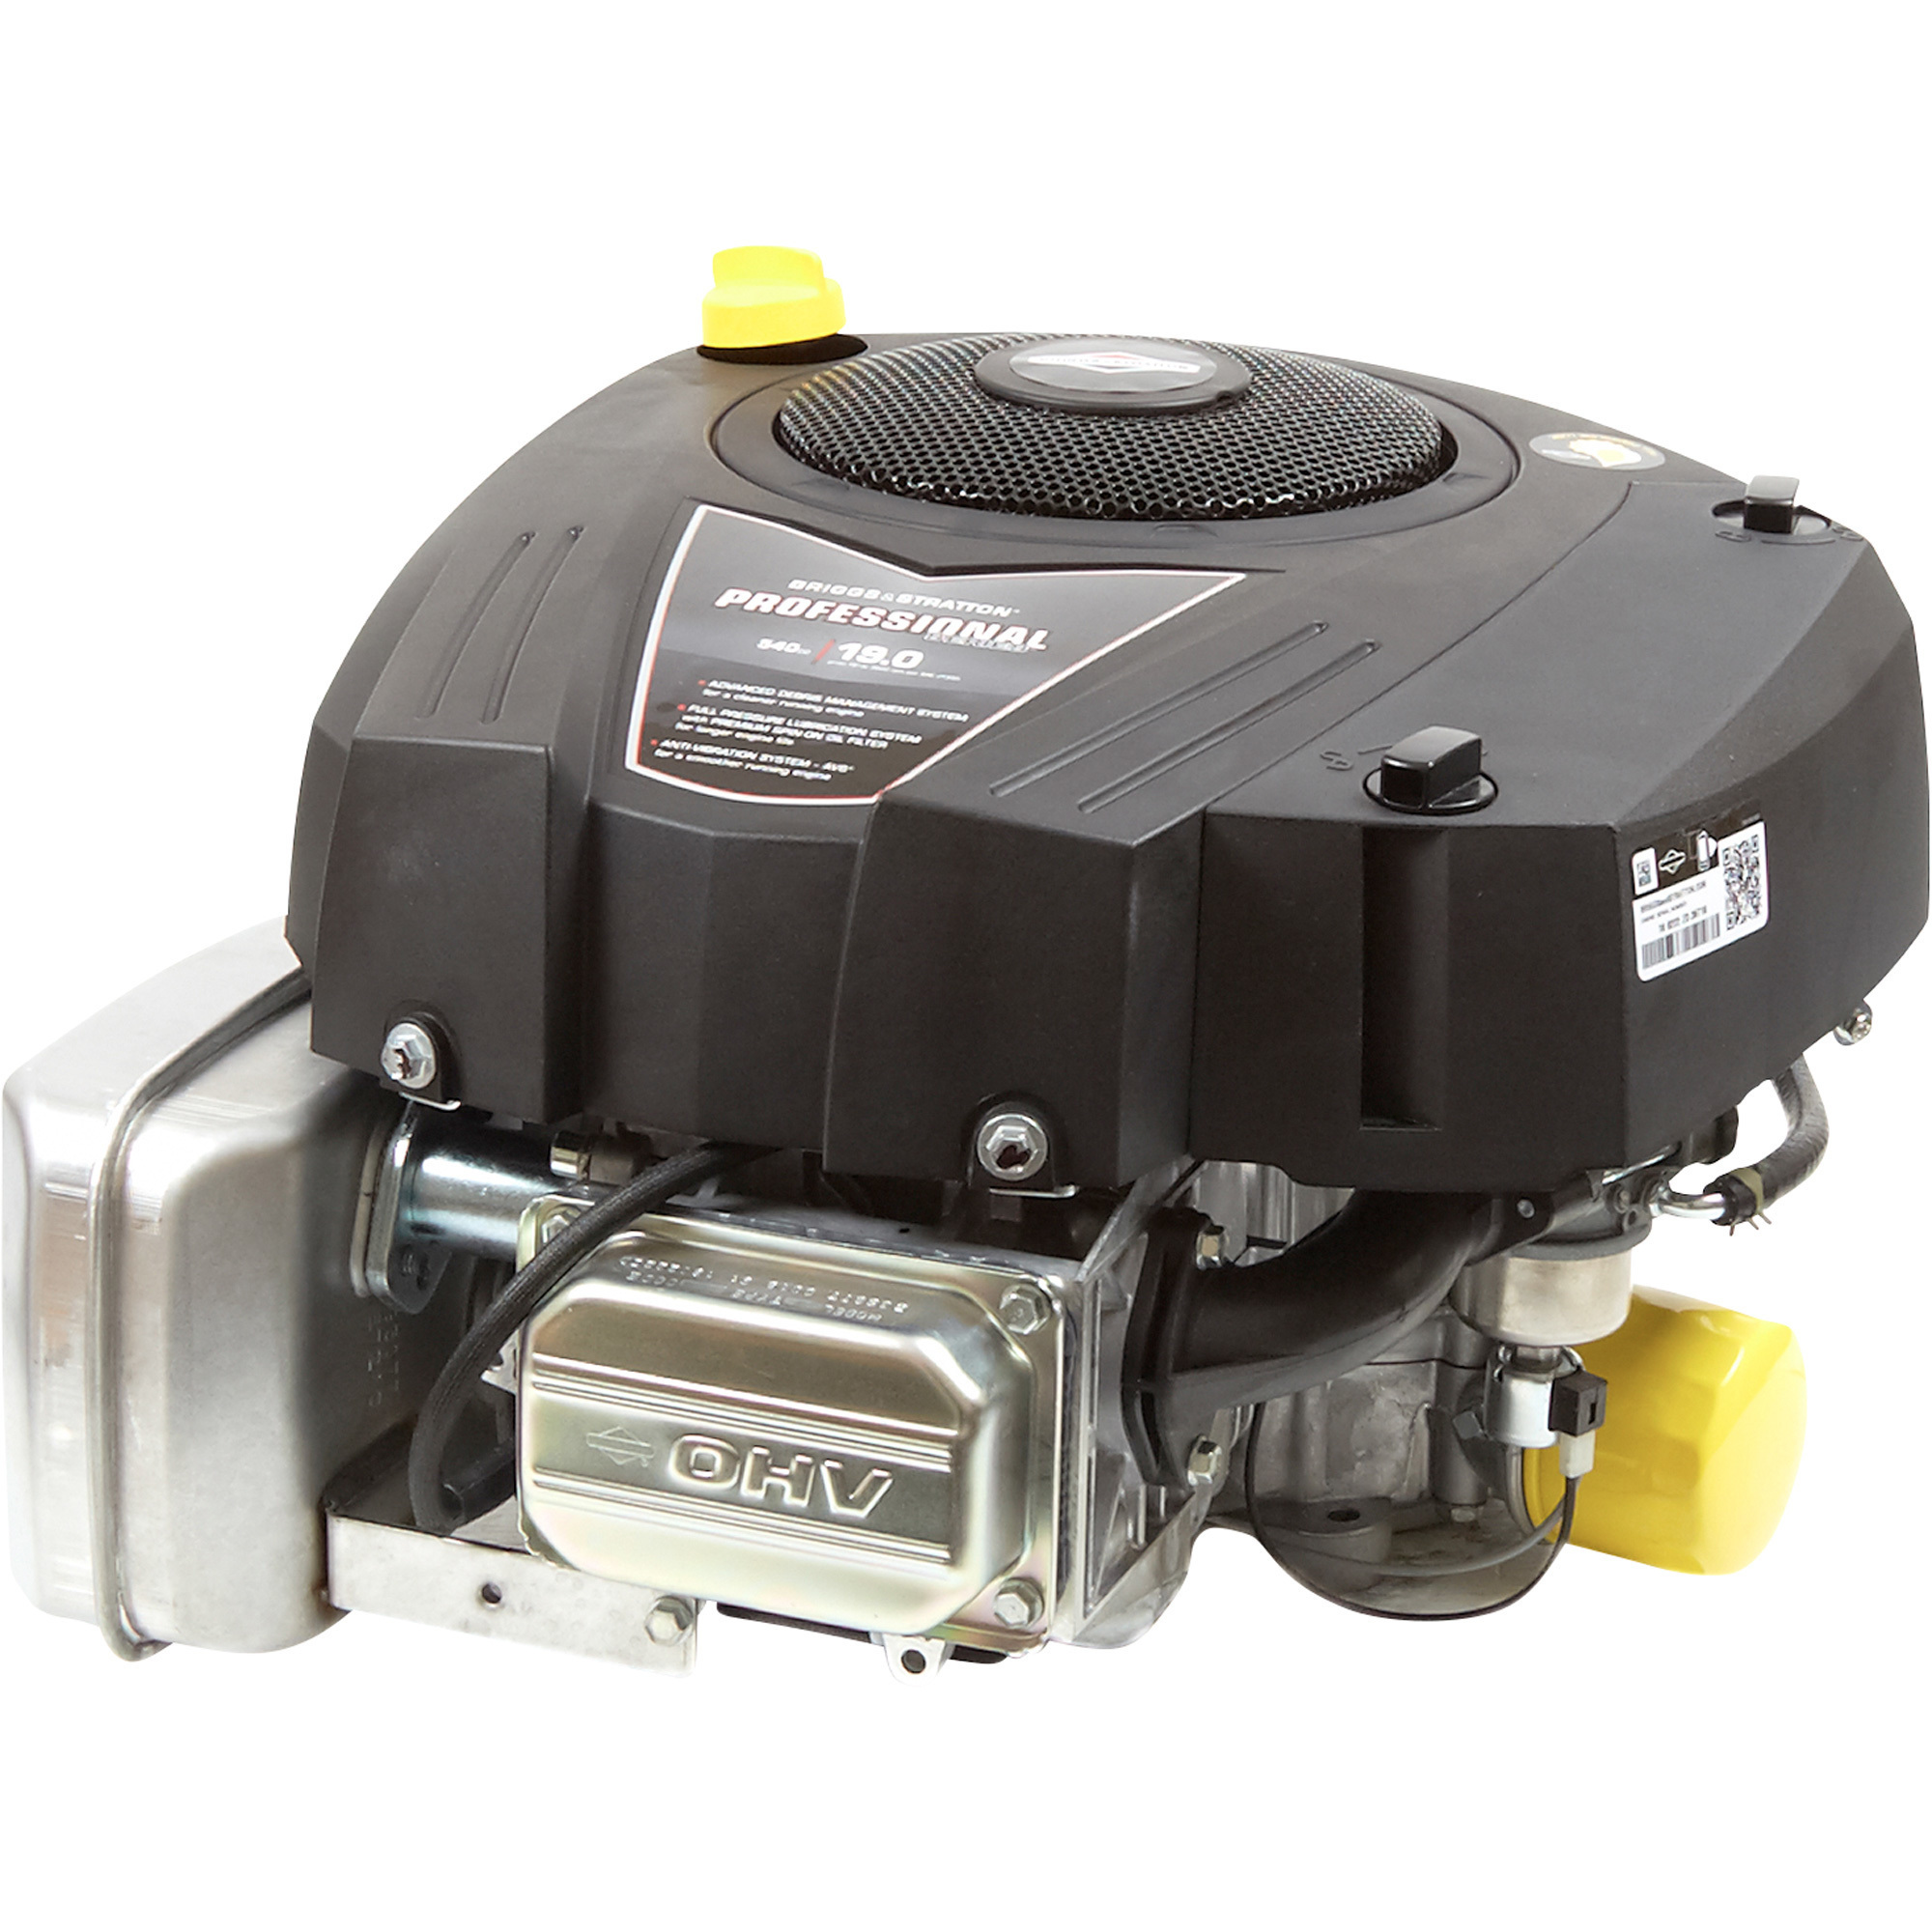 Briggs & Stratton Intek 540cc Vertical OHV Engine with Electric Start â Model 33S877-0019-G1